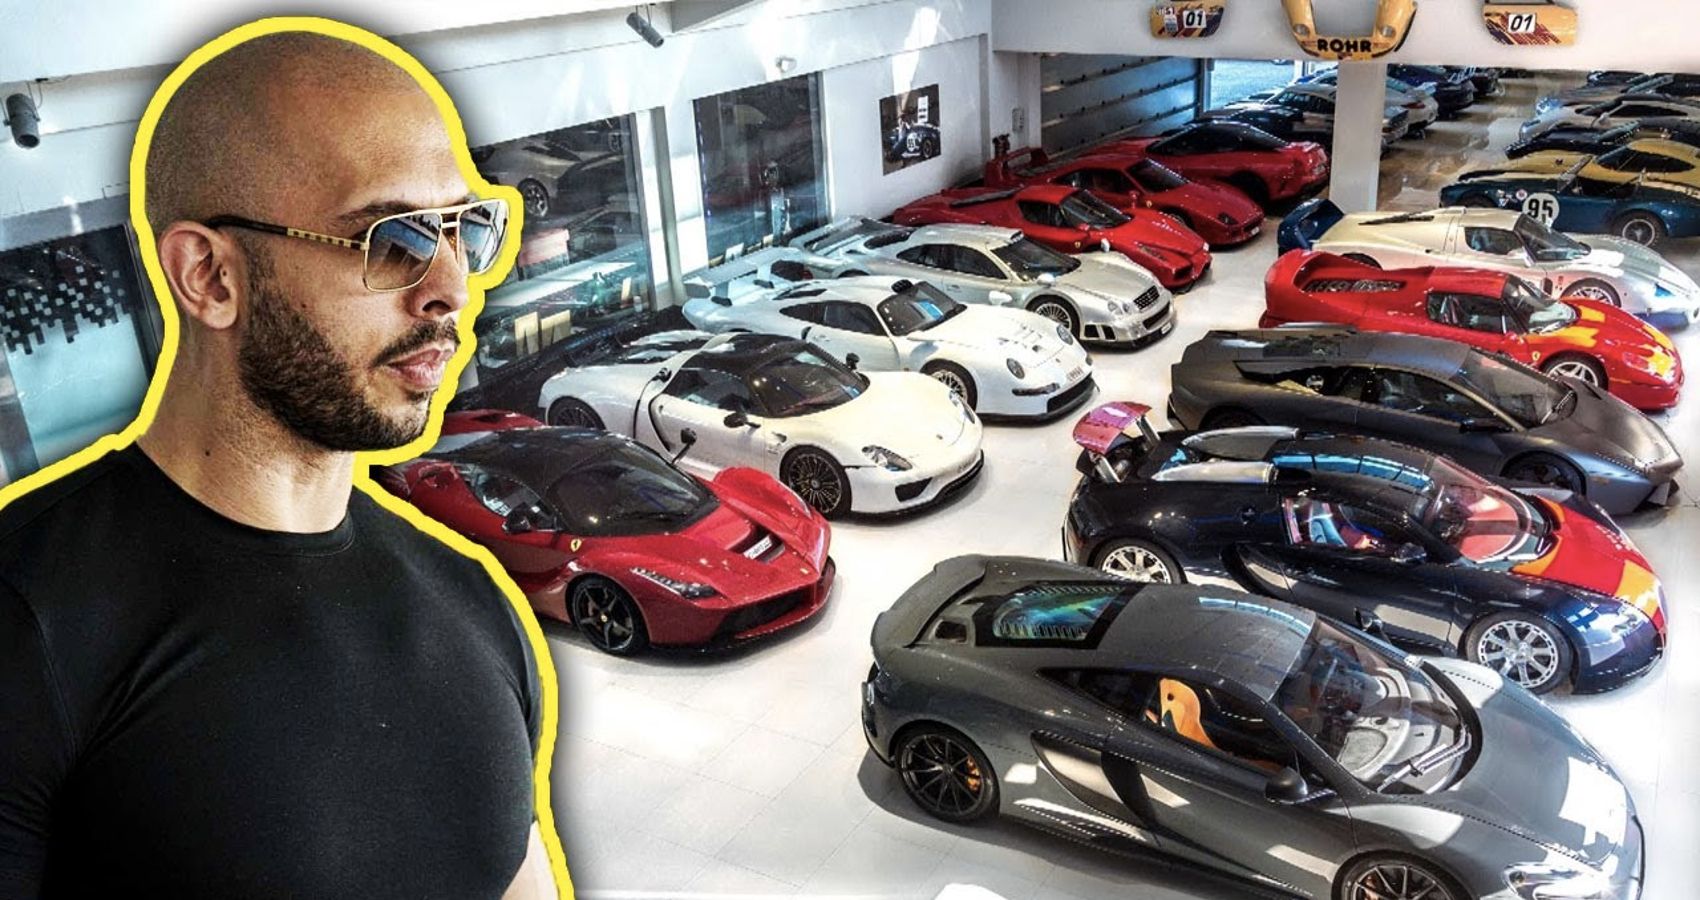 These Are Andrew Tate’s 10 Sickest Luxury Cars That Have Been Seized By Authorities